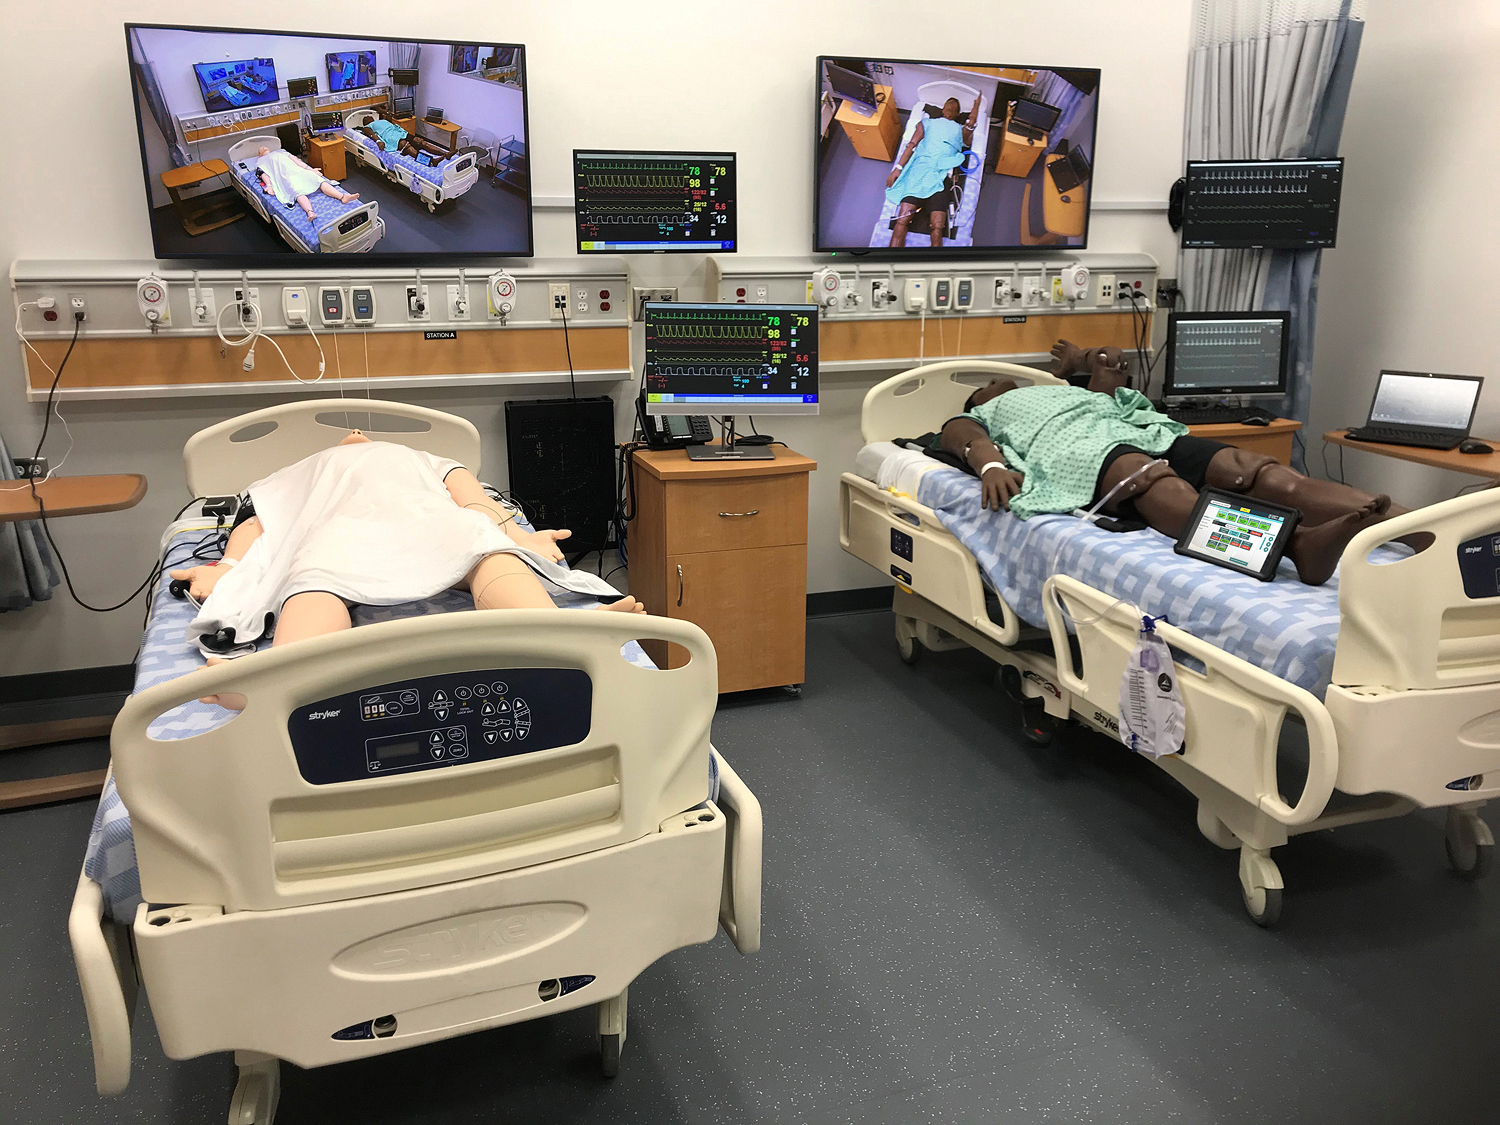 HDMI inputs on the lab station headboard and the wall provide AV connectivity for the human patient simulator, medical equipment, computers, and portable sources. The NAV E 101 encoders are powered over PoE+, freeing outlets for use by these standard station devices.